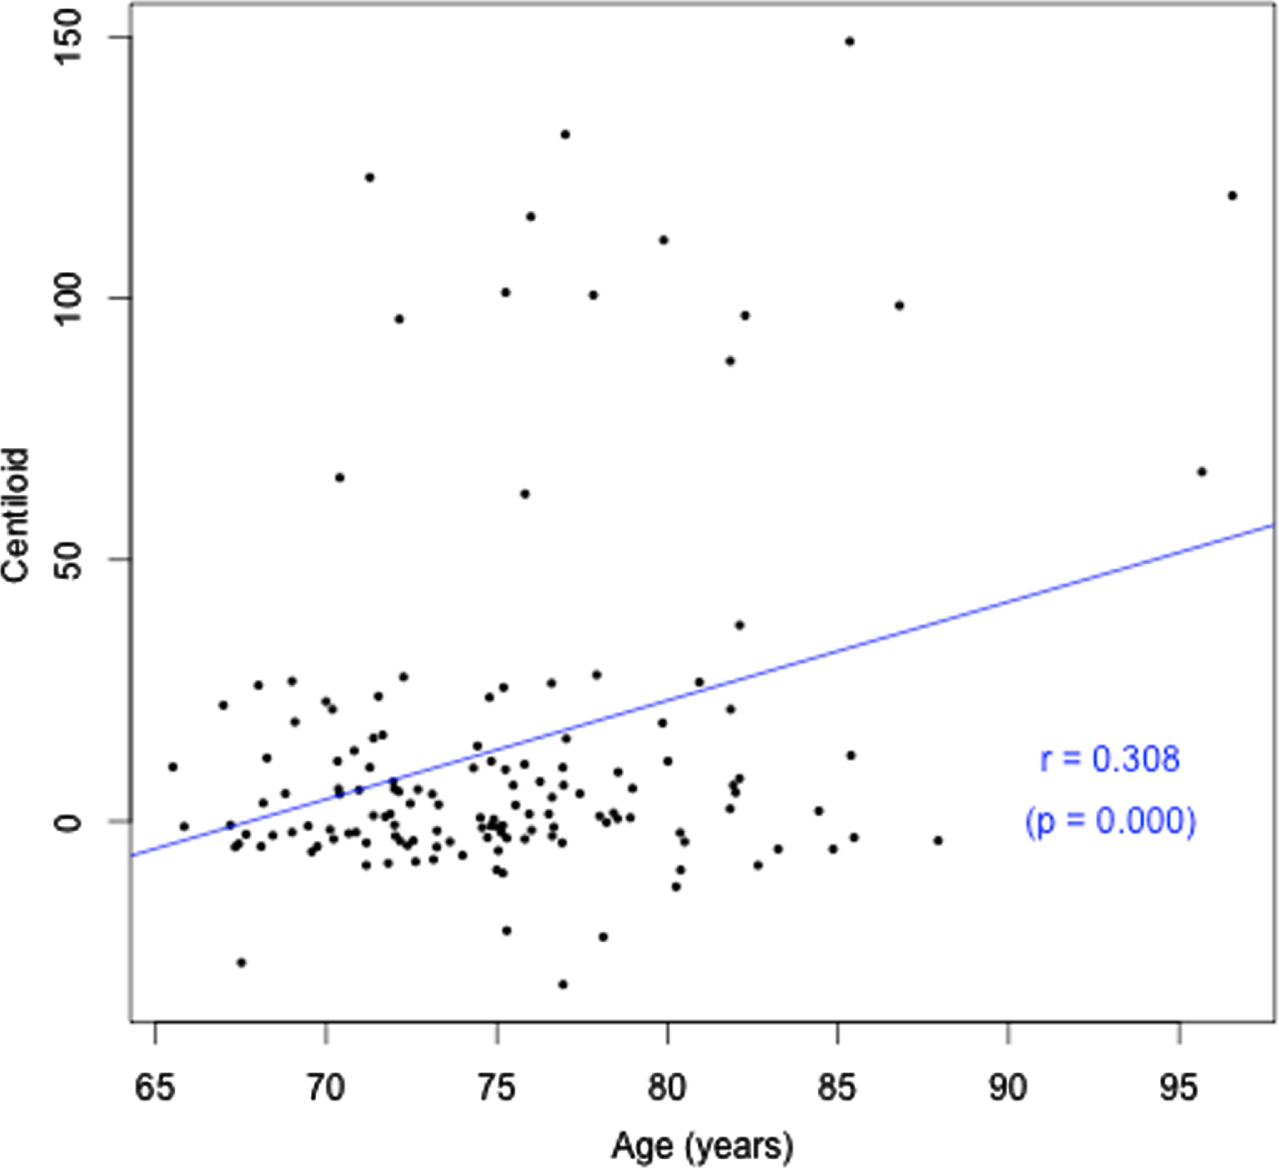 Age (years) versus Aβ load (CL).